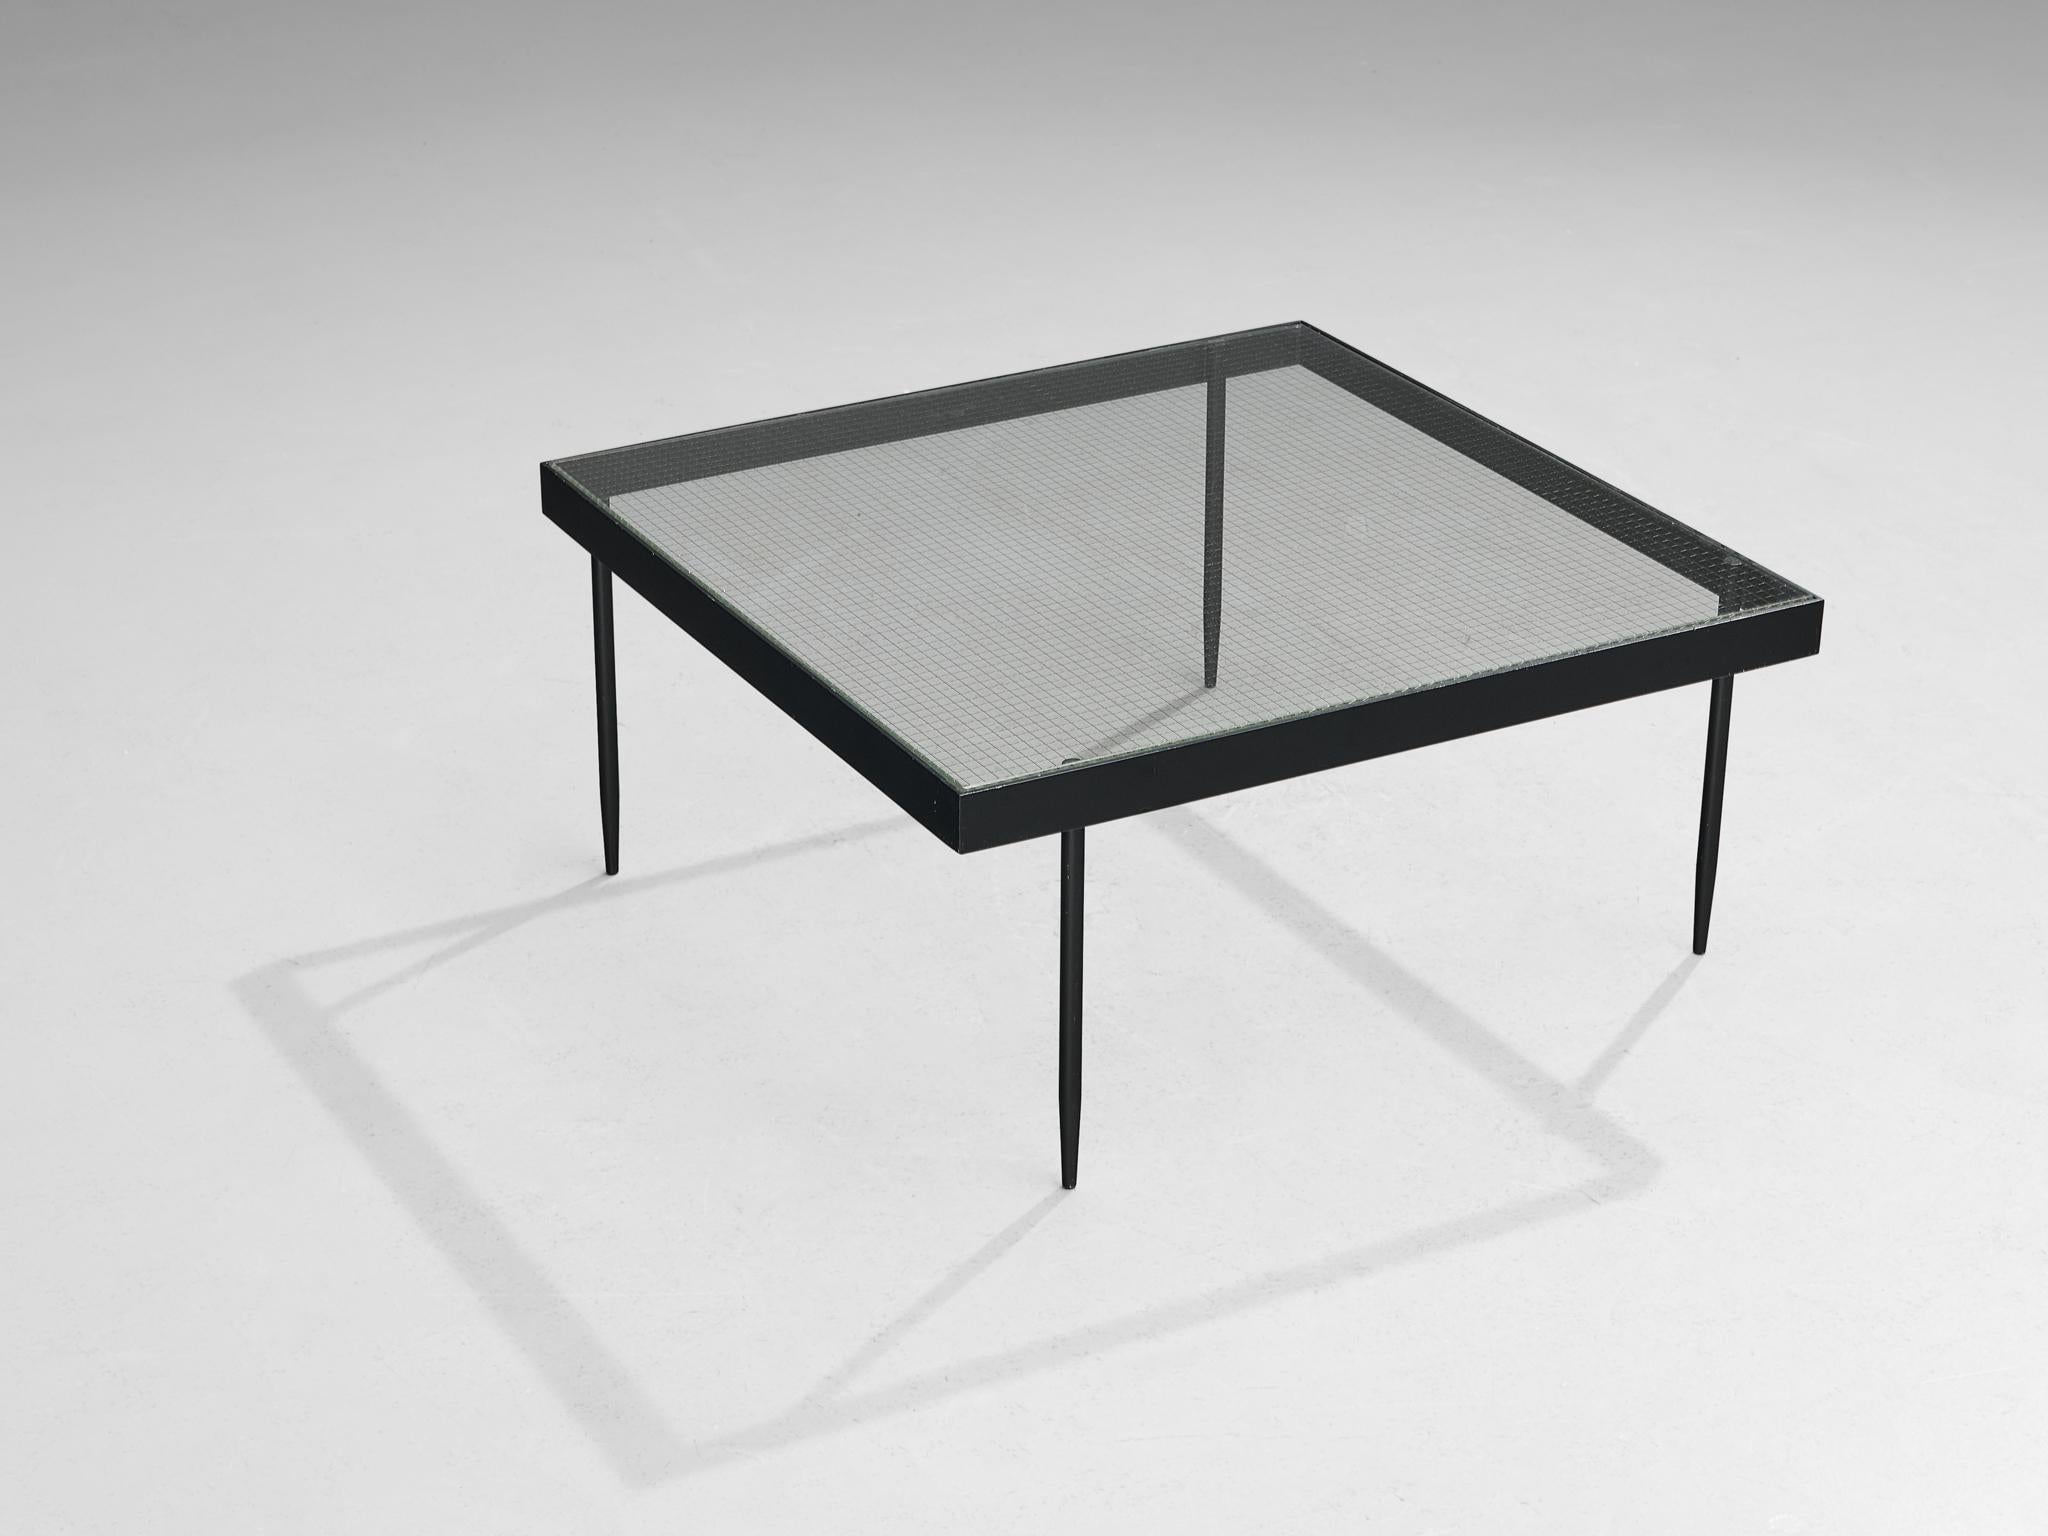 Janni van Pelt, coffee table, model G4A, coated steel, wired glass, The Netherlands, 1958

This coffee table is designed by Janni van Pelt and characterized by simple lines and clear geometry. The black coated square-shaped framework is accompanied